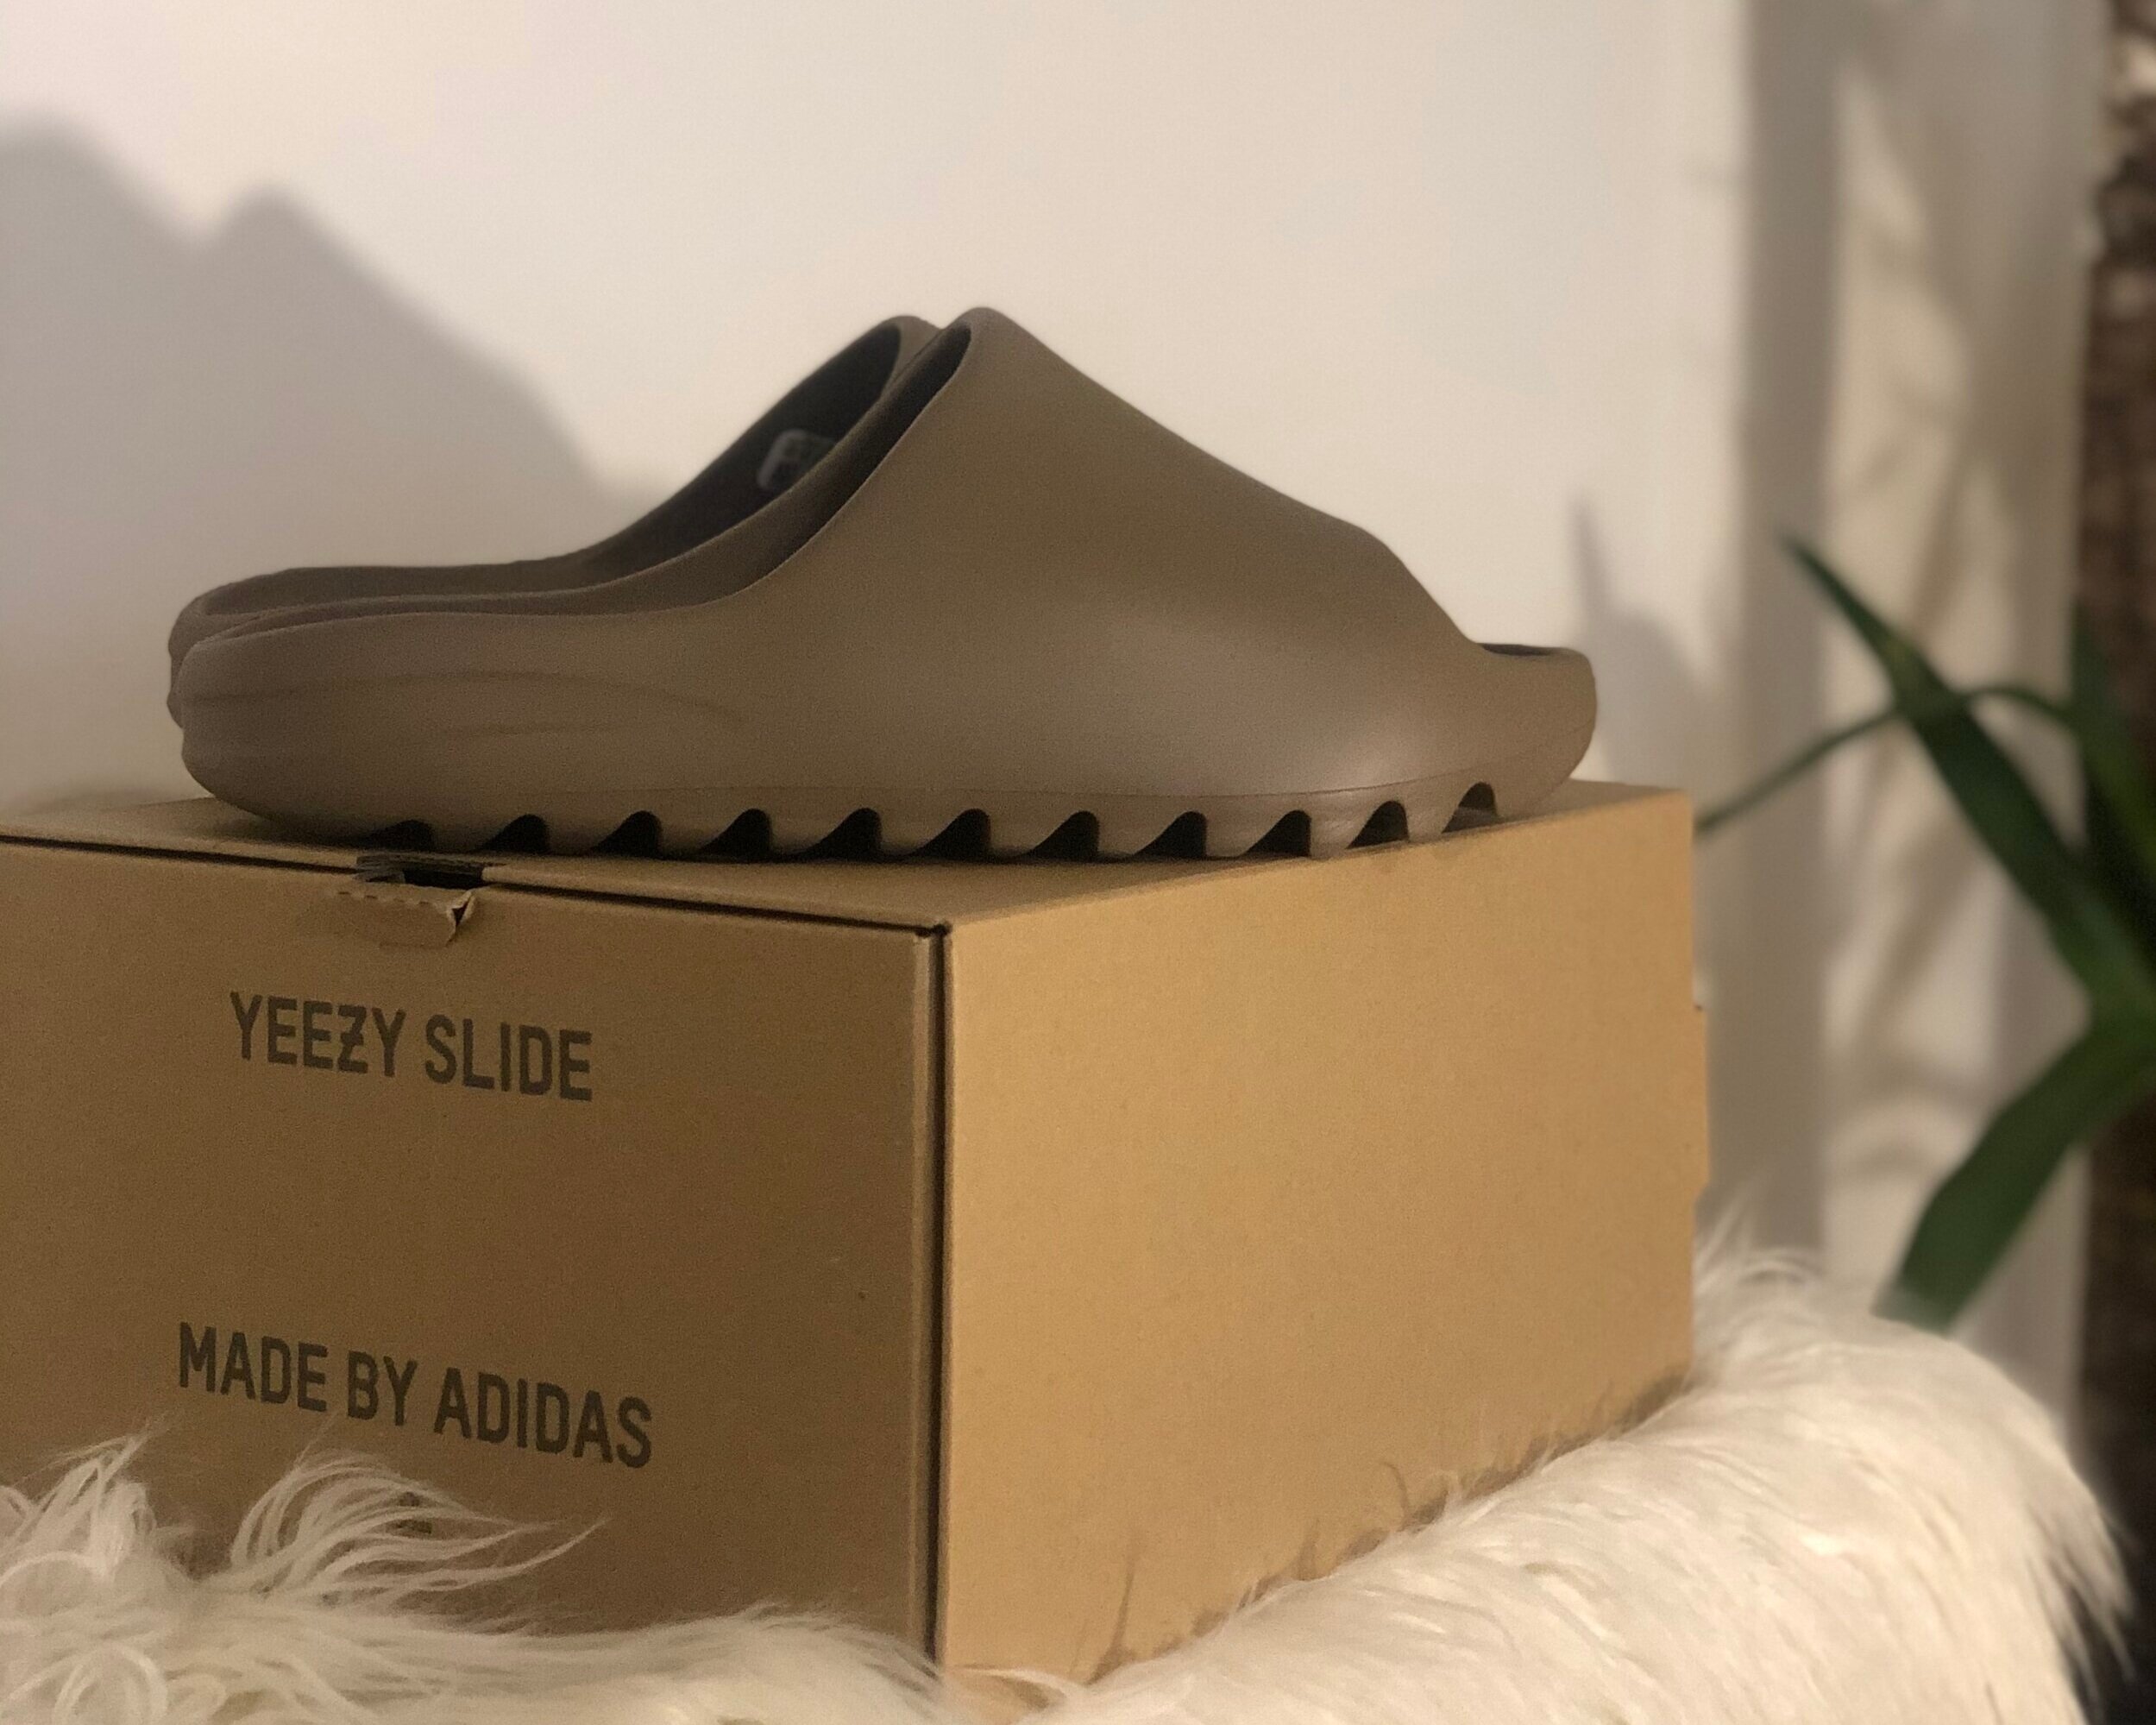 yeezy slide fit review